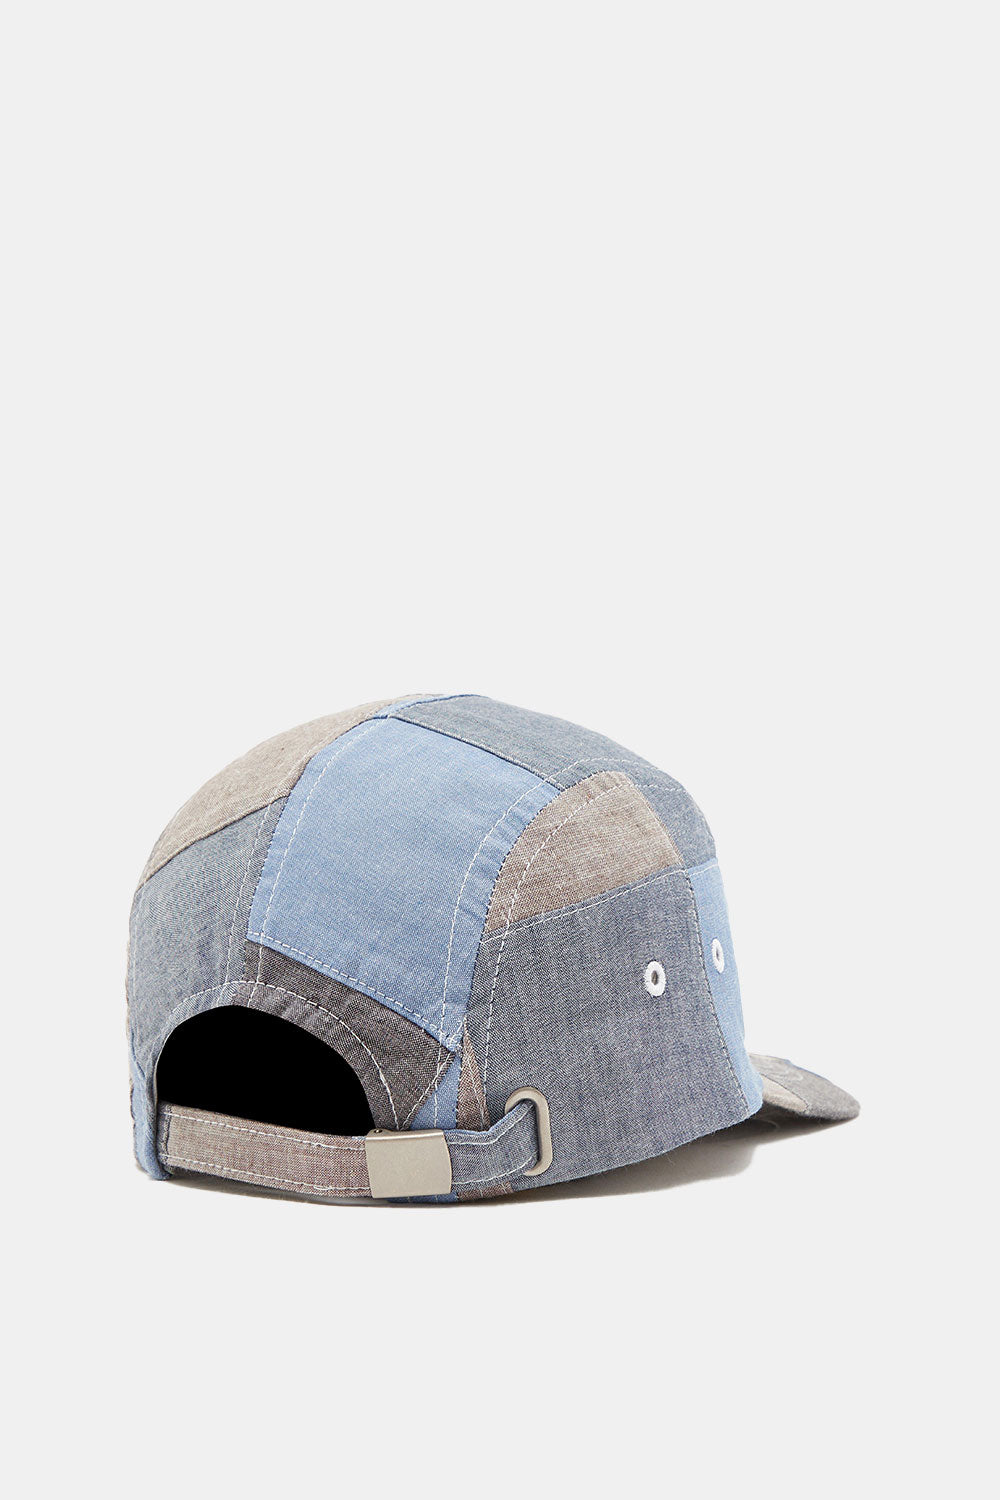 Anonymous Ism Chambray Patchwork Cap (Blue)